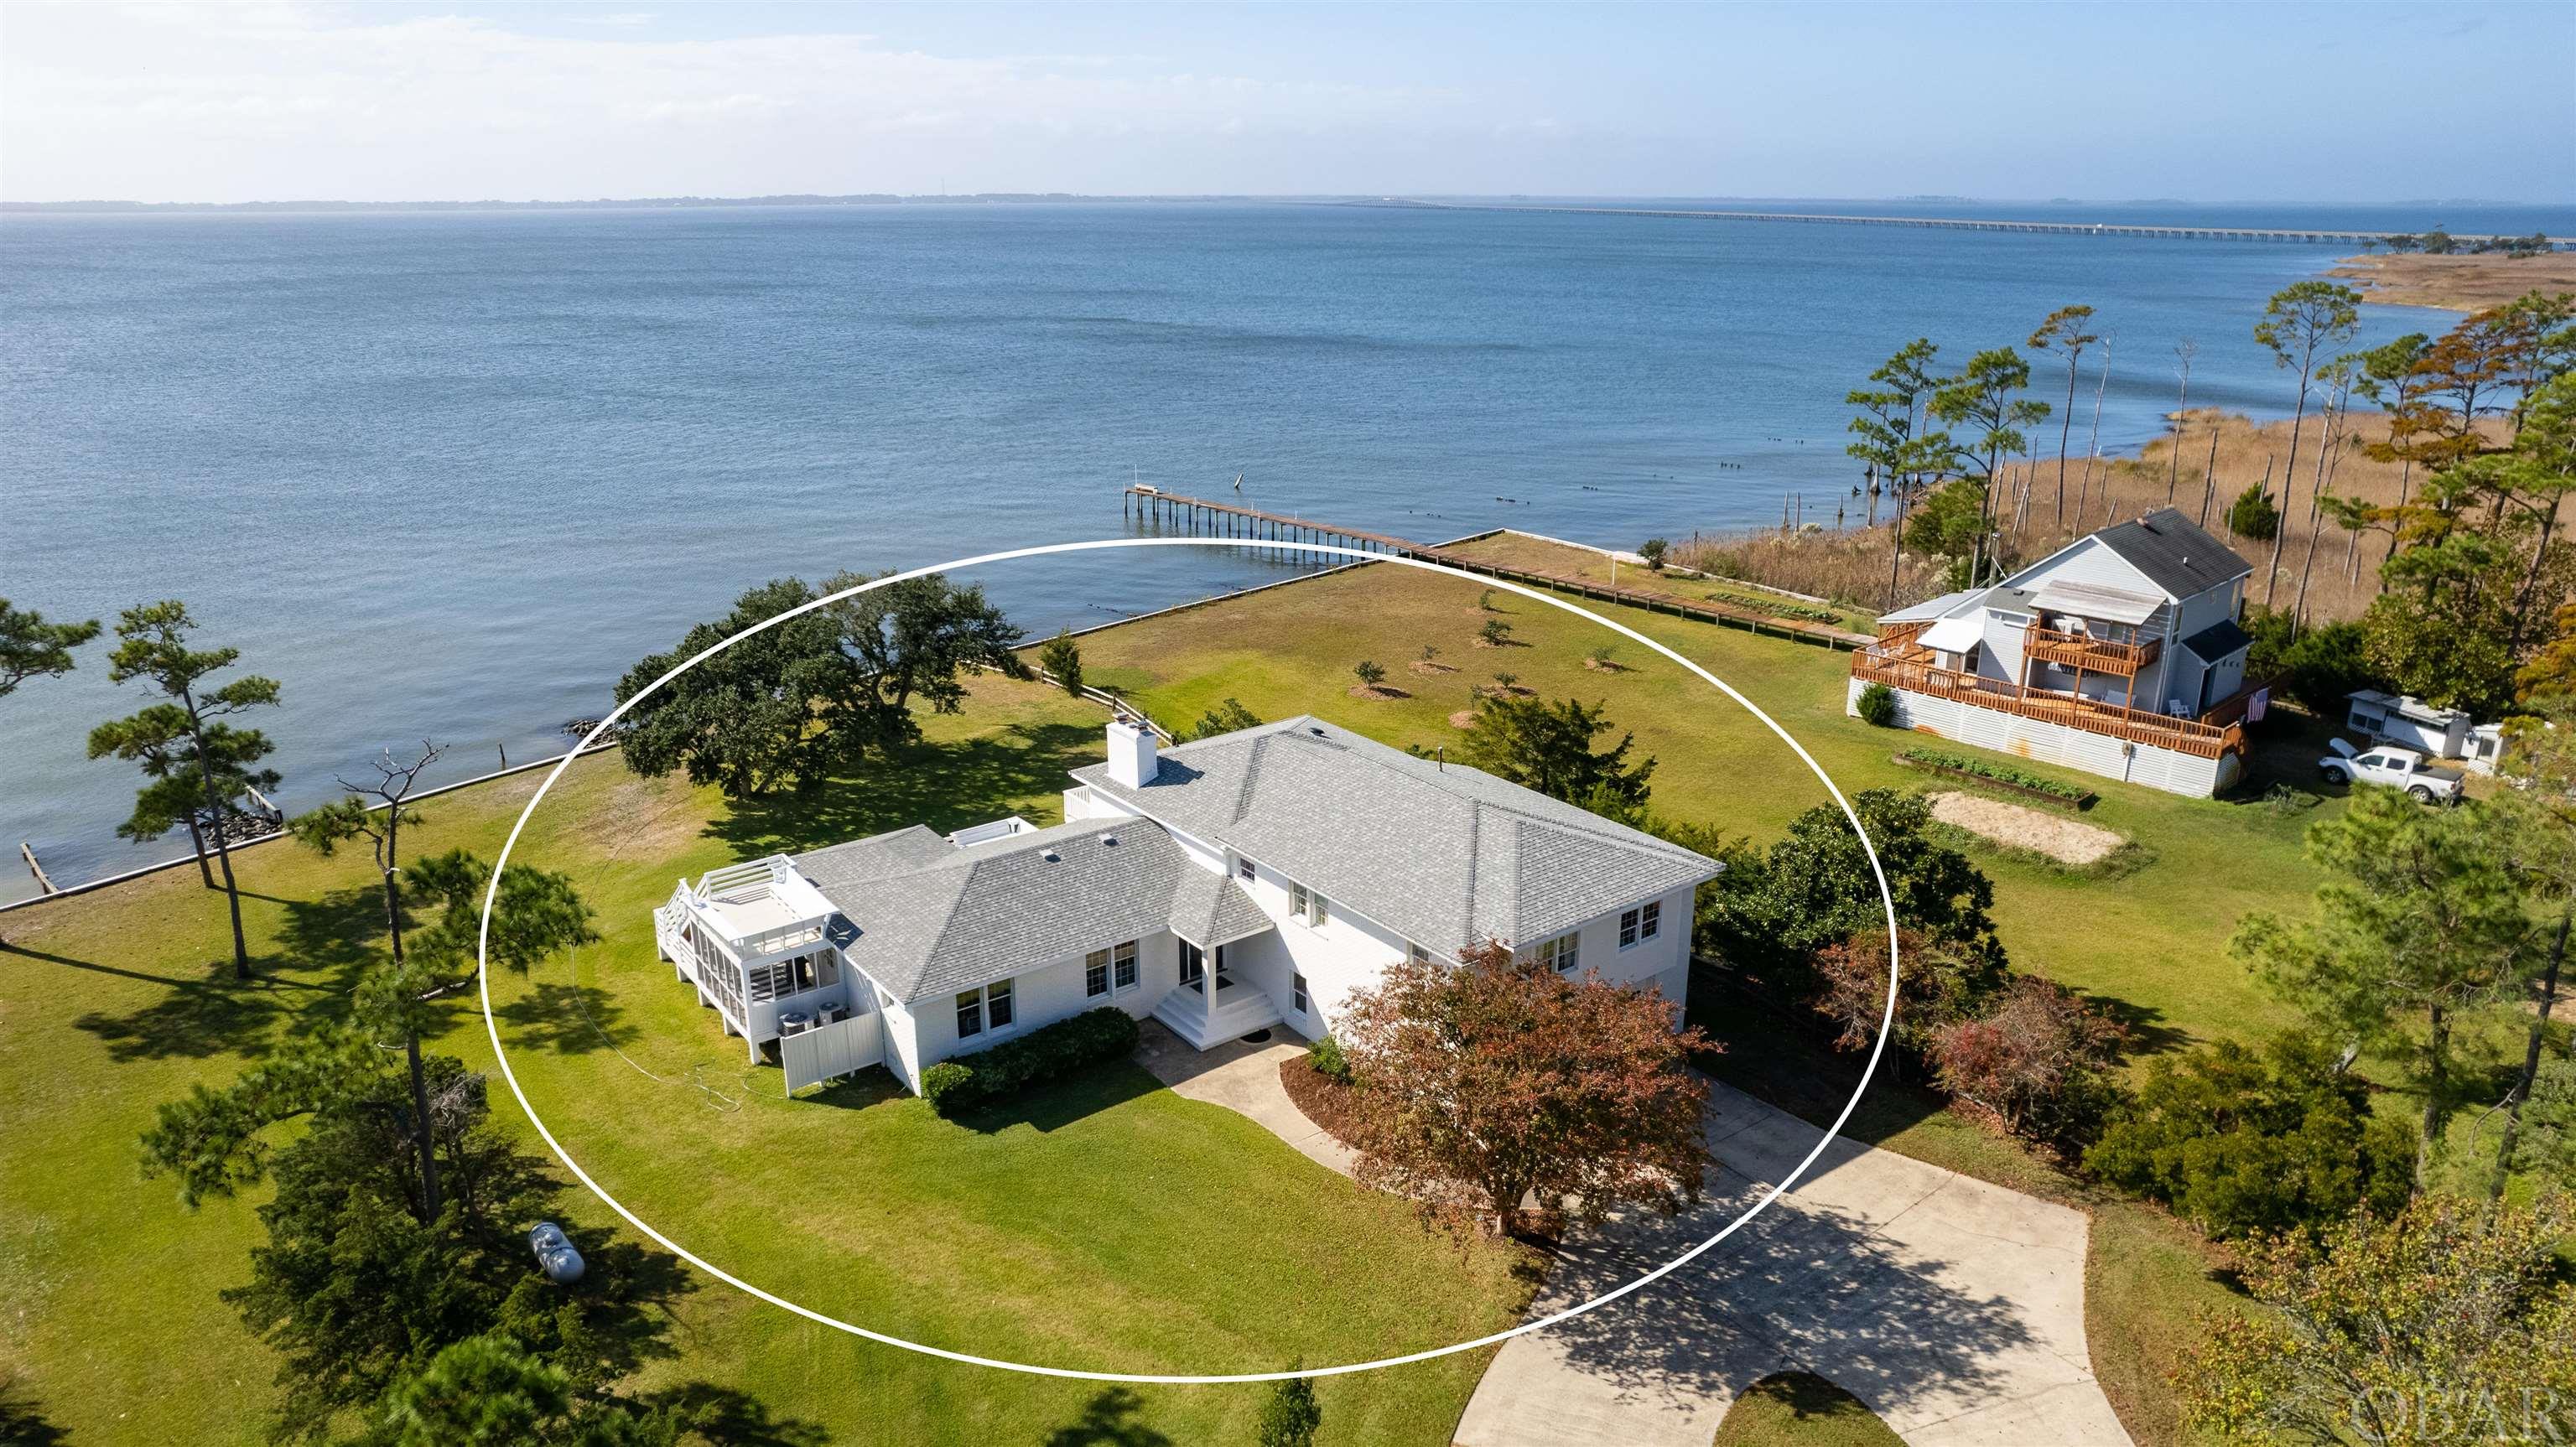 This property is one of those properties that truly do not come on the market often.   A gorgeous soundfront estate tucked away on the North End of Roanoke Island. The home has been well maintained and updated through the years.  At first glance you will notice the large parcel of land the home sits on.  A parcel that could be subdivided to add a guest house or second home.  The expansive views of the Croatan sound will take your breath away.    Walking into the front door the hardwood floors grasp your attention and pull you into the bright living area with panoramic  sound views. The massive kitchen provides tons of storage in the cabinets, beautiful quartz countertops compliment the ceramic tile floors.  The sunroom with kitchen booths are perfect for having breakfast or a quick lunch while watching the dolphins play in the sound. A formal dining room is the picturesque place to host friends and family for supper.  After supper move to the boundless porch area to enjoy a drink and watch the sunset, before moving back into the spacious living area featuring built-ins and plenty of space to spread out around the fireplace.  When it is time to retire for the night the Master bedroom is one of the largest on the island. This master retreat has two walk-in closets and a NEW beautifully equipped ensuite bathroom.  The three guest rooms also offer plenty of space as kid's rooms, and office, or for family to come to visit.  The 900 sq ft two car garage has plenty of space to house two vehicles, as well as plenty of extra space for storage without being cramped for space.  Just pass garage you will find the approximate 900 squ ft bonus space which offers three rooms that could be perfect as a separate apartment for airbnb, mother-in-law suite, or convert to your own home office.  This property is one of a kind and the location is yet another plus.  Just around the corner from the NC Aquarium, less than a 5 minute drive to all three schools, the Lost Colony, and the Gardens.  10 Minutes to the Ocean!  It has it ALL!  Updates include new roof in 2018, in 2022 - complete master bathroom remodel, screened in porch, sheetrock throughout living area, exterior & interior paint, new front door, decking, in 2007 septic replaced.  The home had the new addition added in 1998 to add an extensive amount of space.  There are several measurements from appraisals and the county tax site that states that the home is larger.